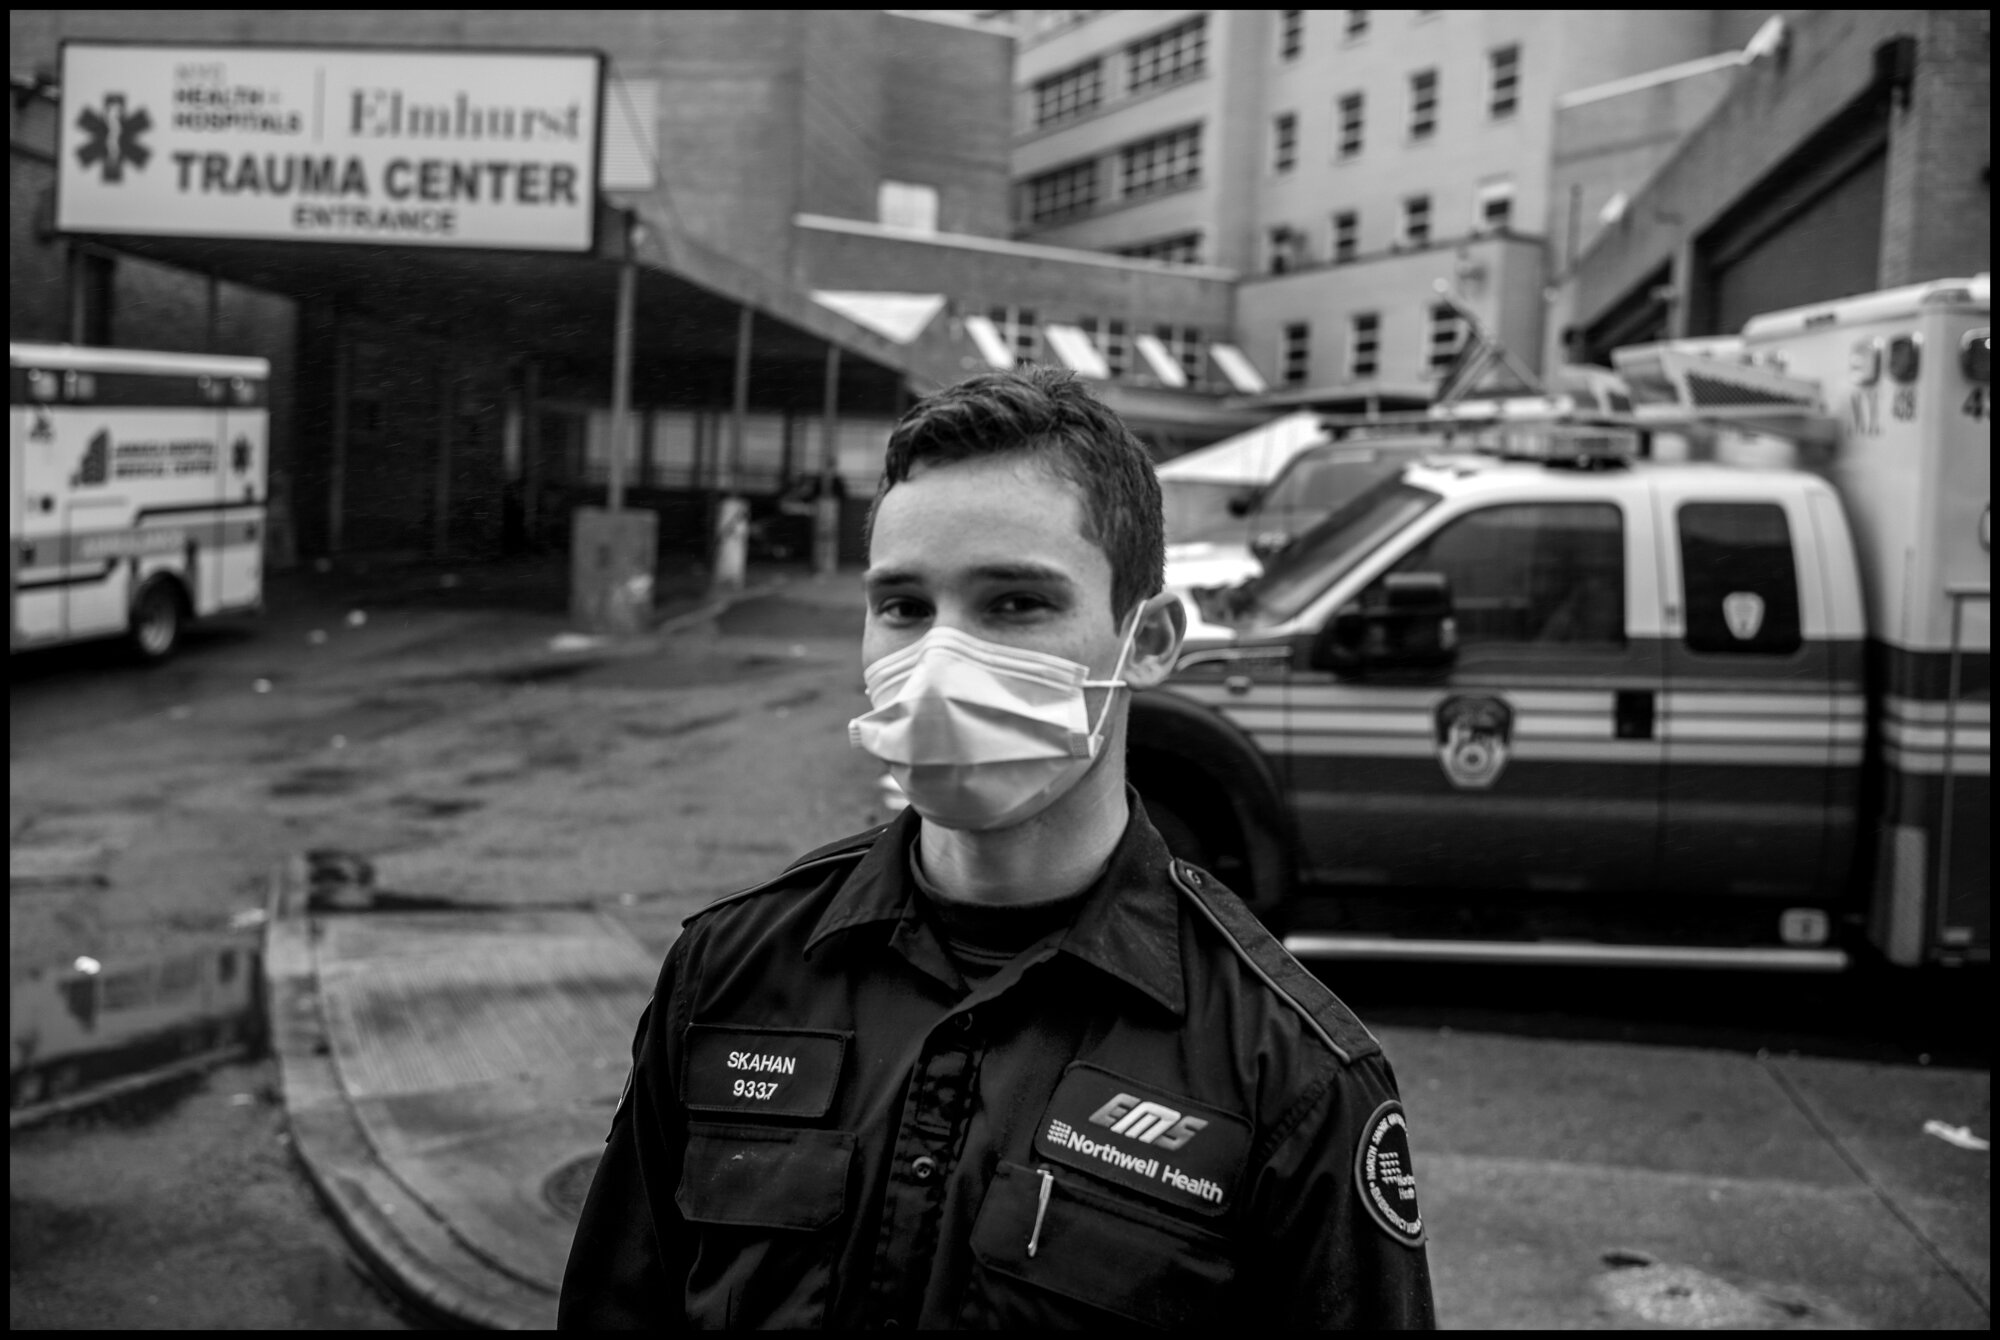  Daniel, 26, is am EMT, and he has just delivered a patient to Elmhurst Hospital in Queens, one of the New York Hospitals with the most cases of coronavirus. “ It’s tough. It’s a lot at once. Had a lot of patients with symptoms. We call them fever / 